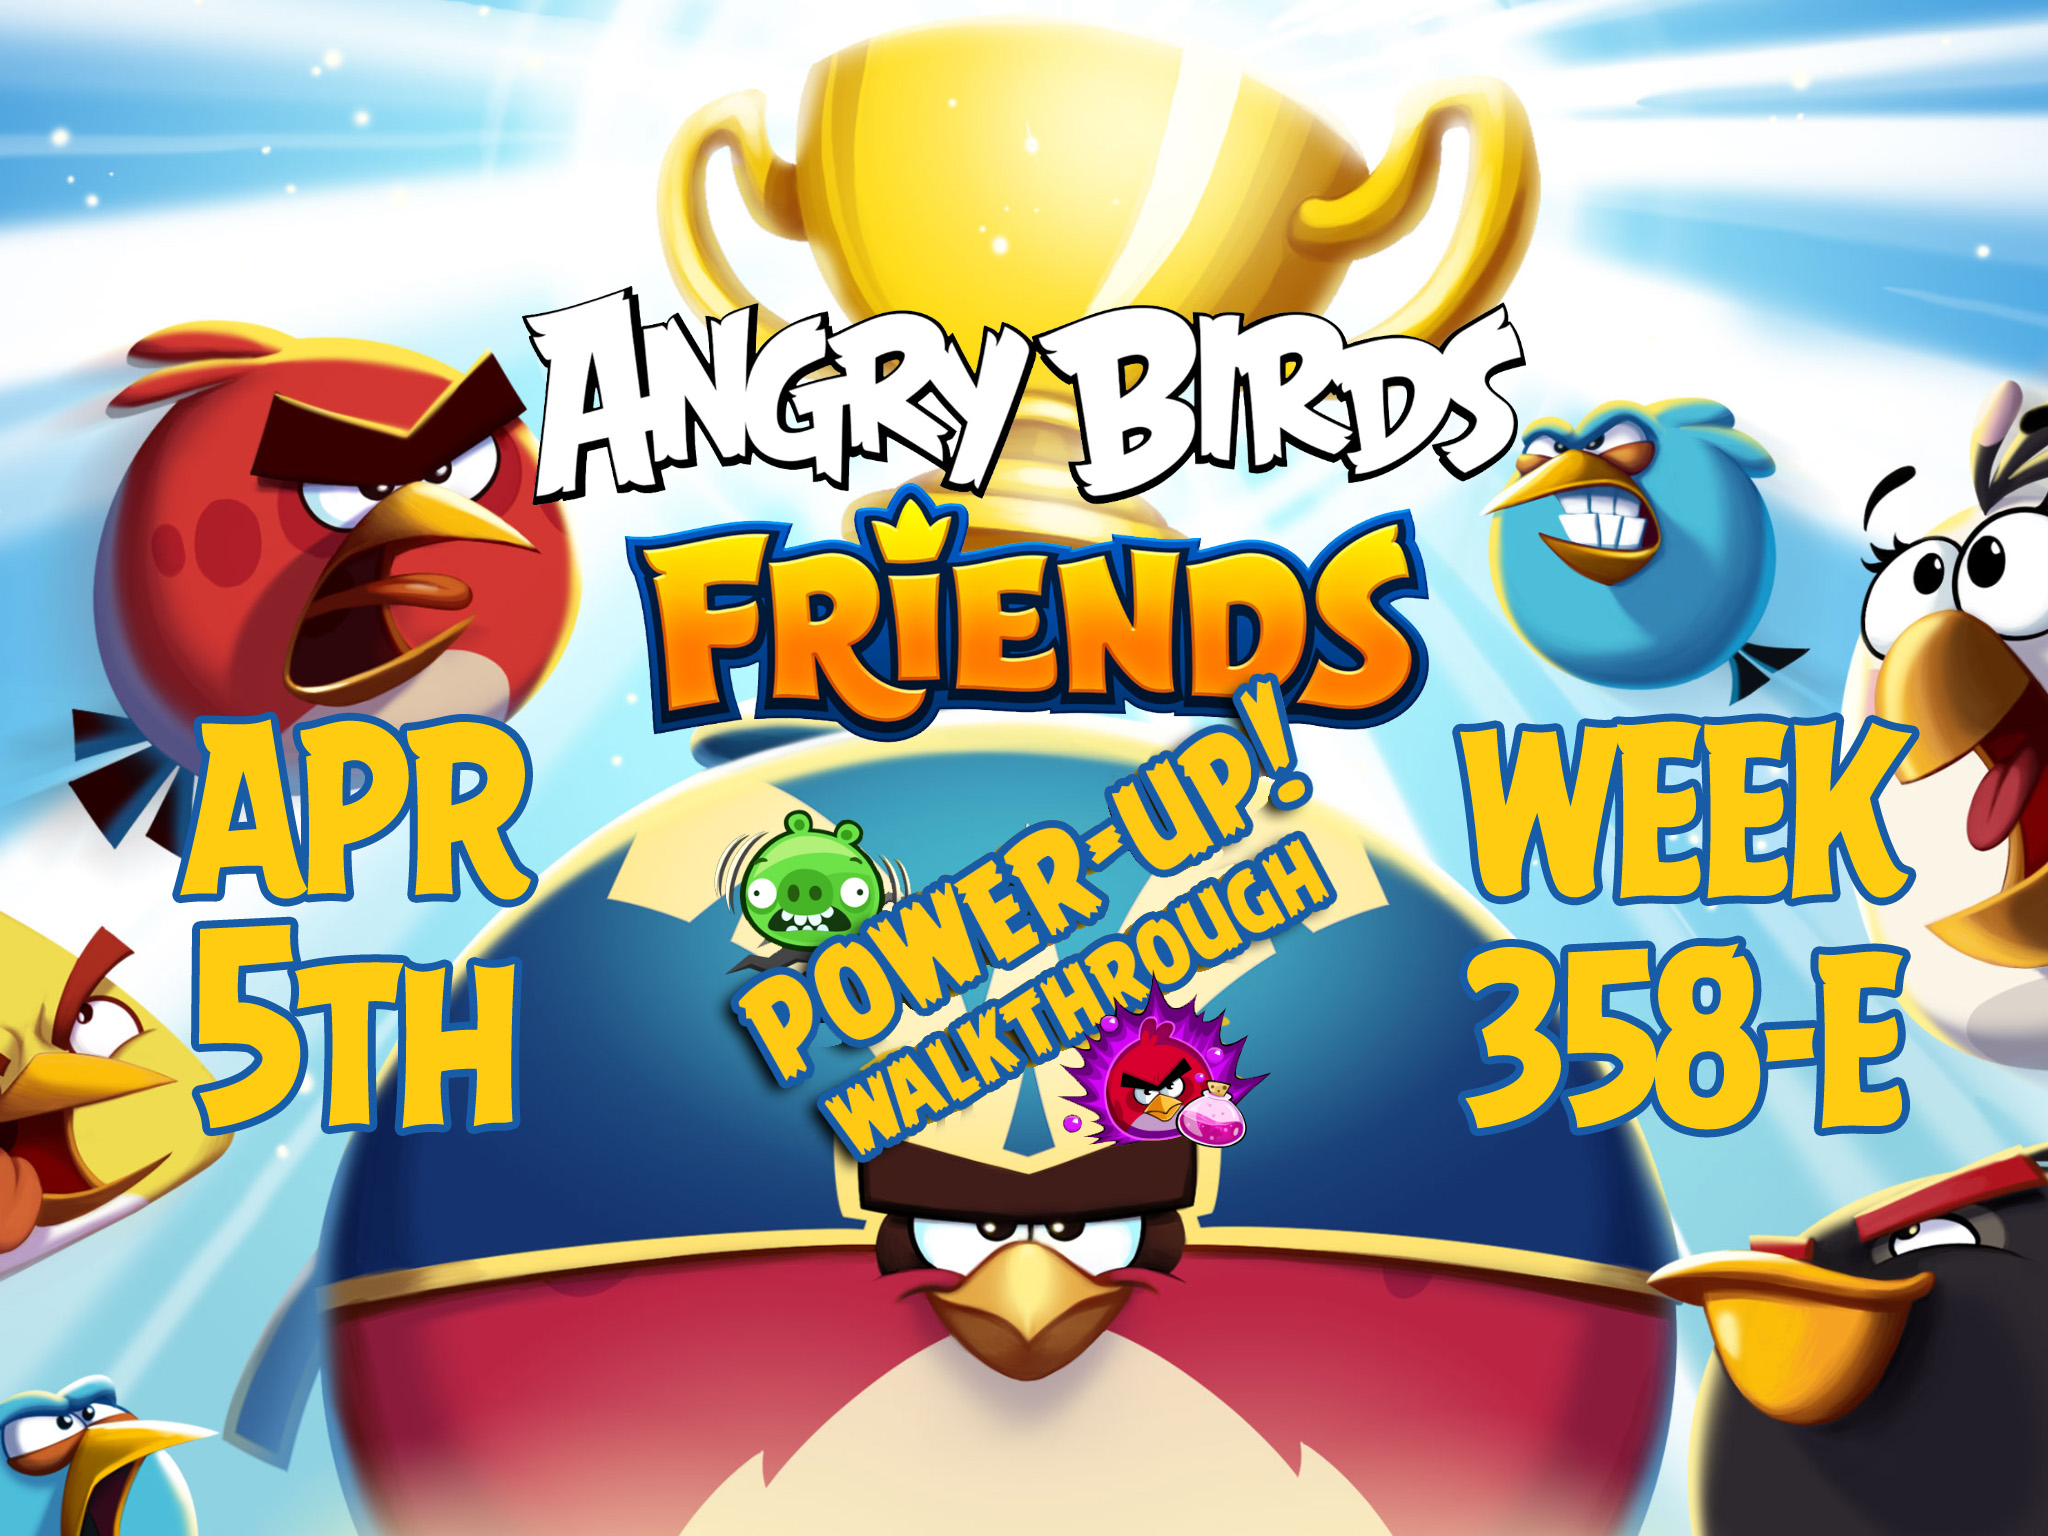 Angry-Birds-Friends-Tournament-Week-358-E-Feature-Image-PU